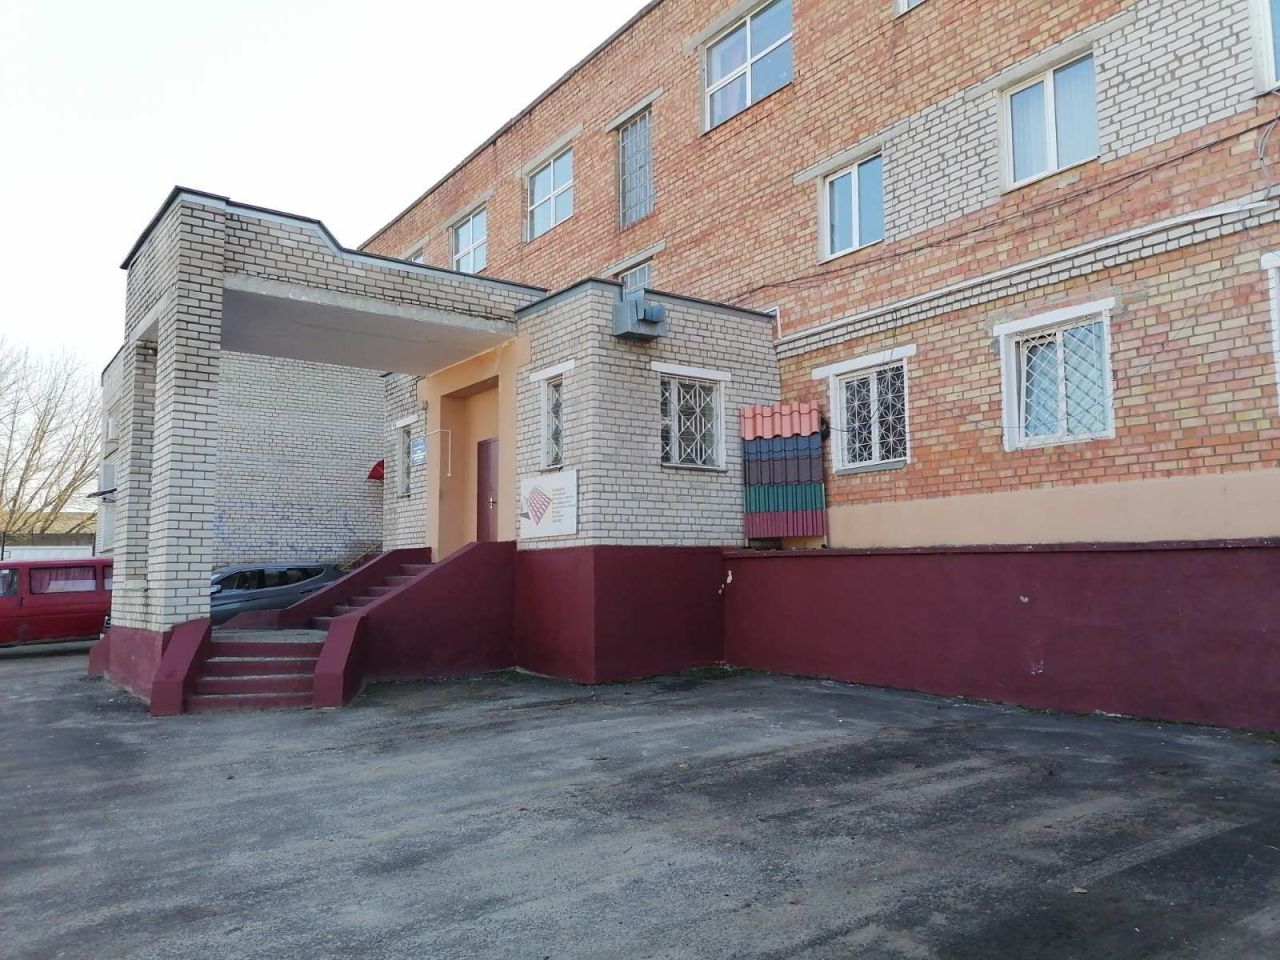 Commercial property Molodechno, Belarus, 2 798.8 sq.m - picture 1